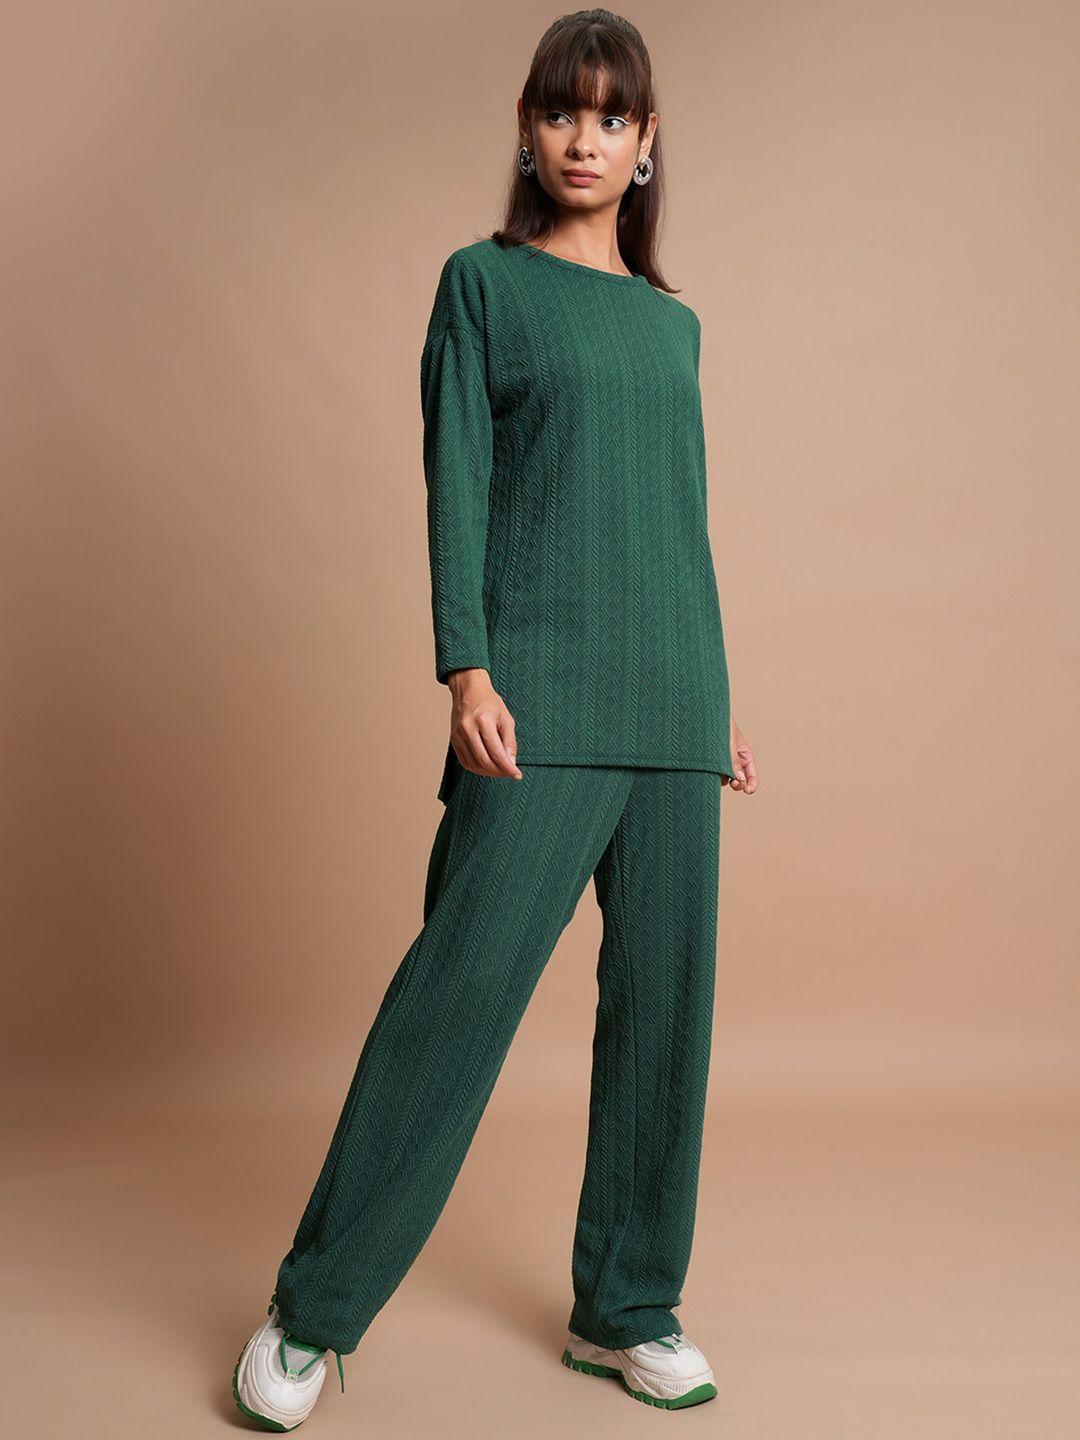 tokyo talkies green self-design relaxed sweater with trousers